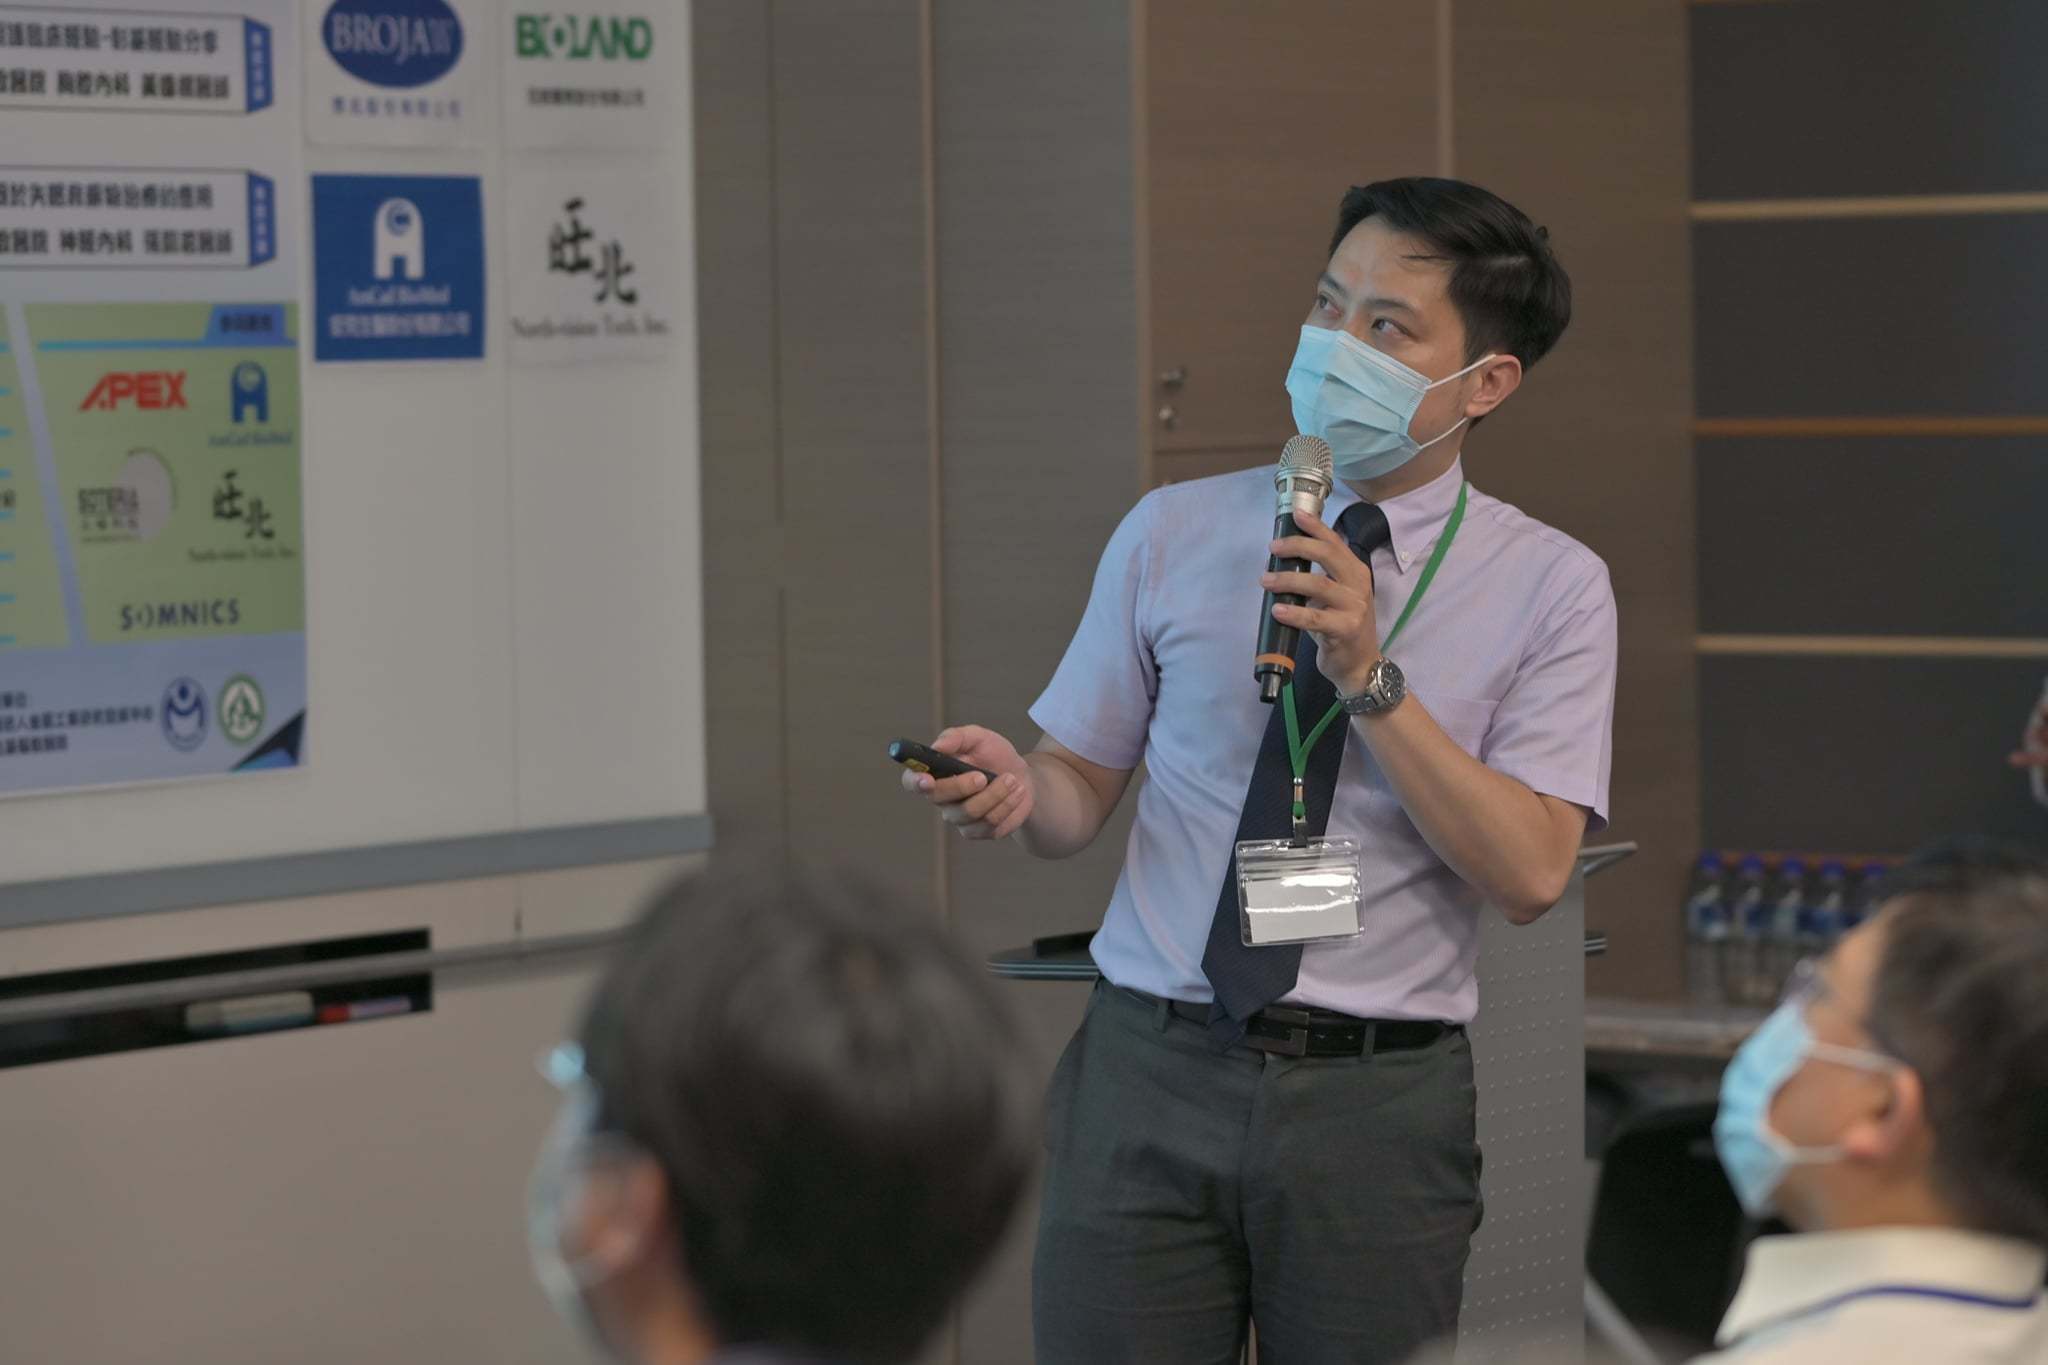 Dr. Huang Guo-Yang presented the clinical experience of respiratory care in the hospital